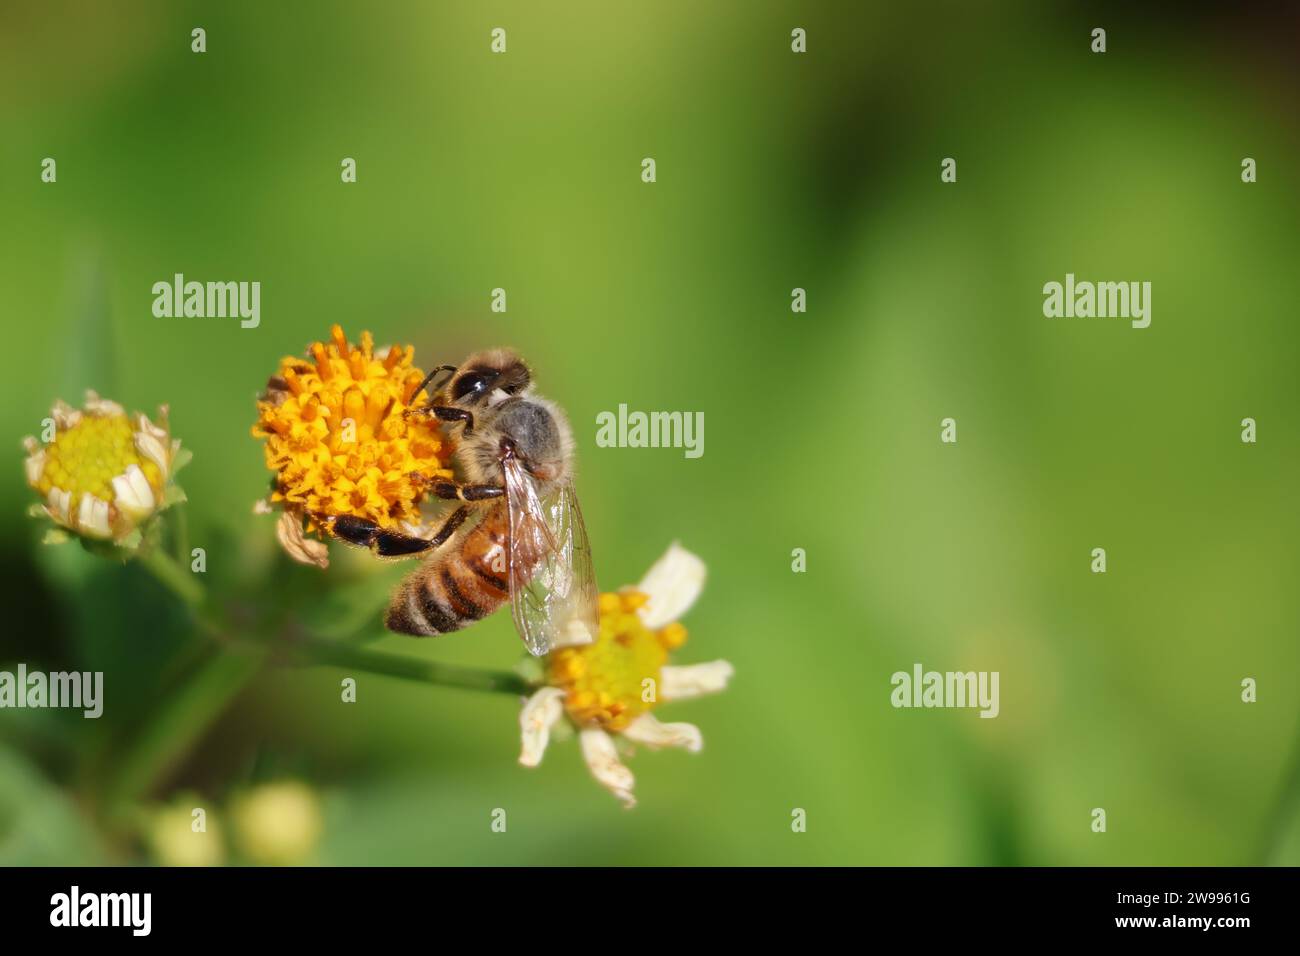 A closeup shot of a honey bee on a vibrant yellow flower Stock Photo